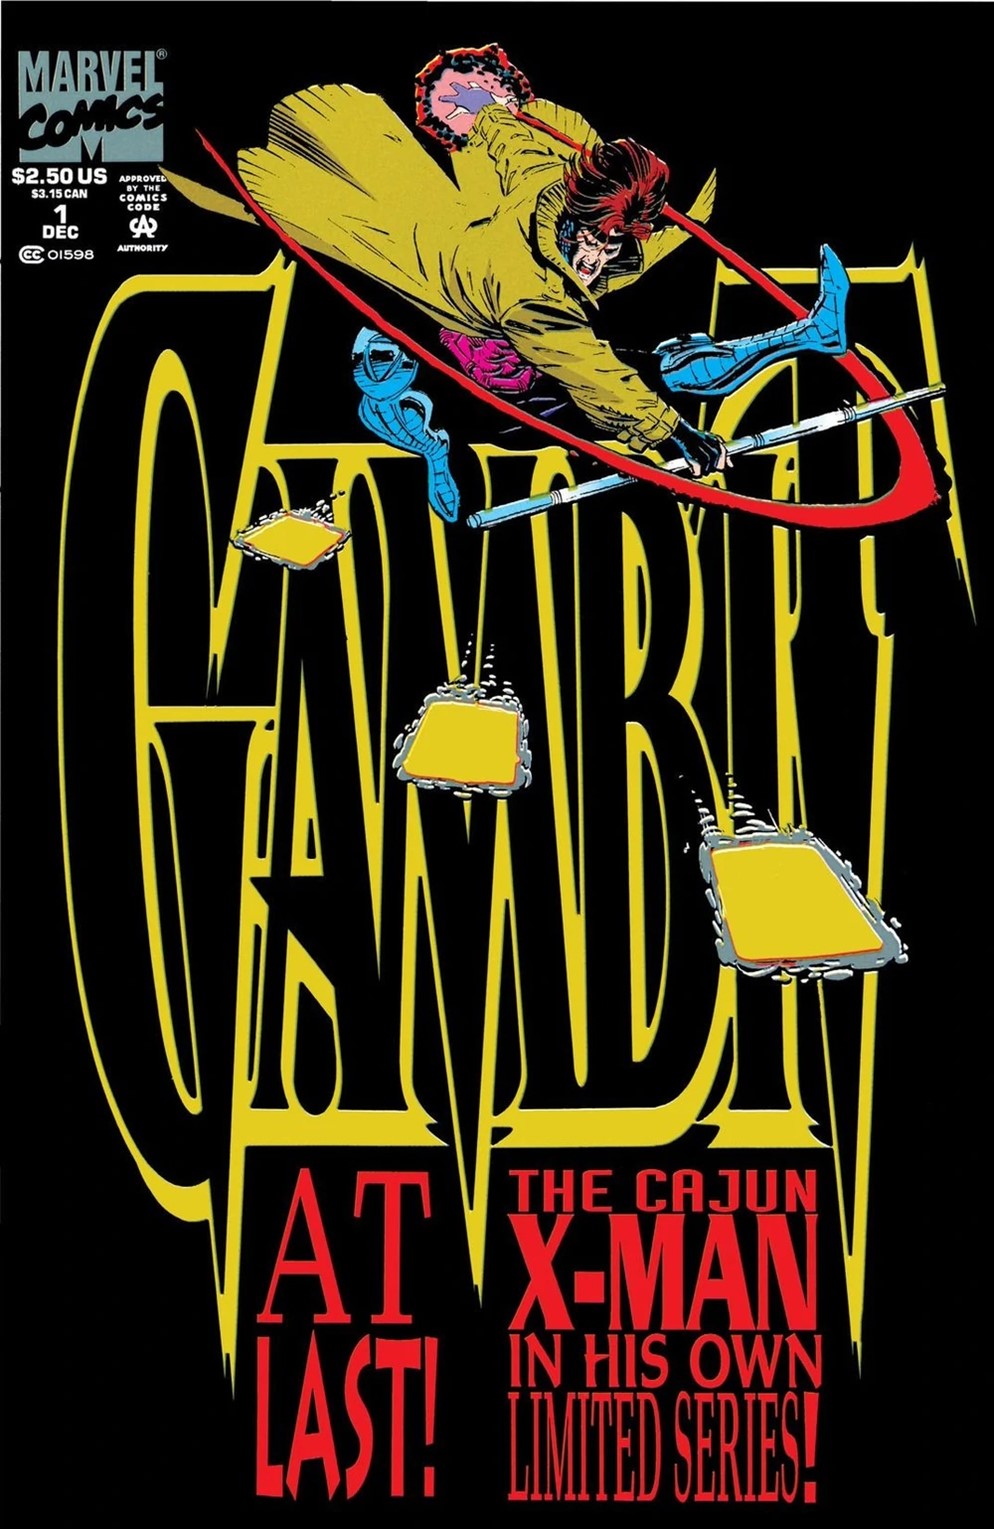 Gambit Volume 1 Limited Series Bundle Issues 1-4